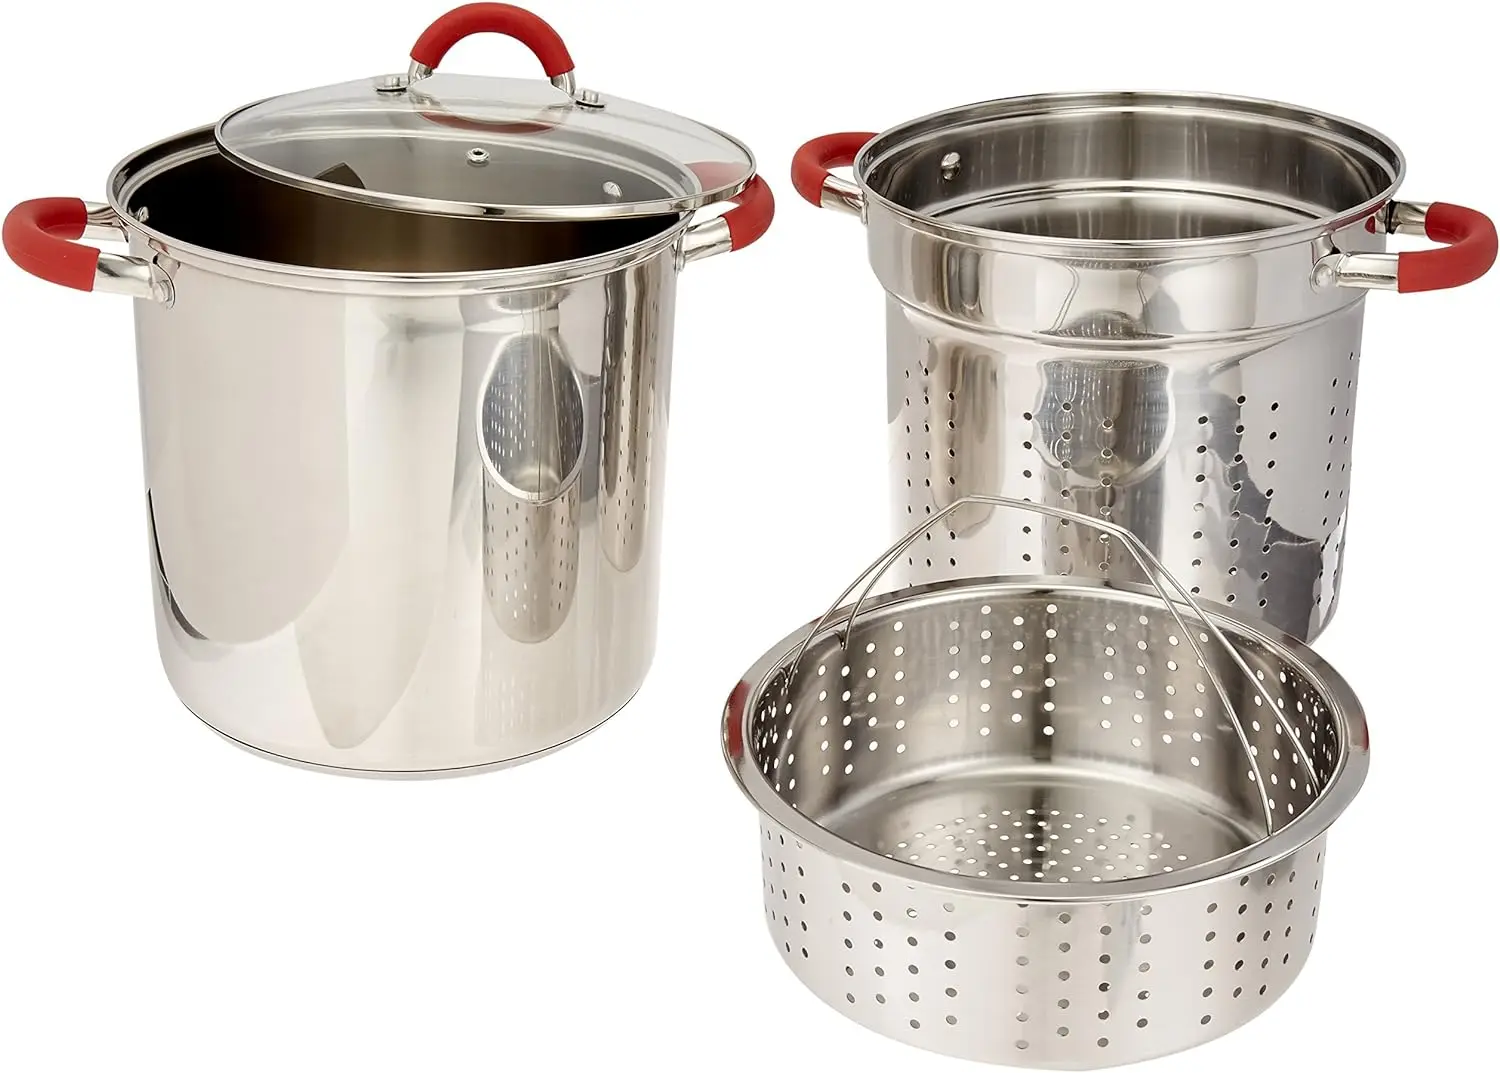 

Multifunction Stainless Steel Pasta Cooker with Encapsulated Base, Vented Glass Lid, and Riveted Silicone Covered Handles